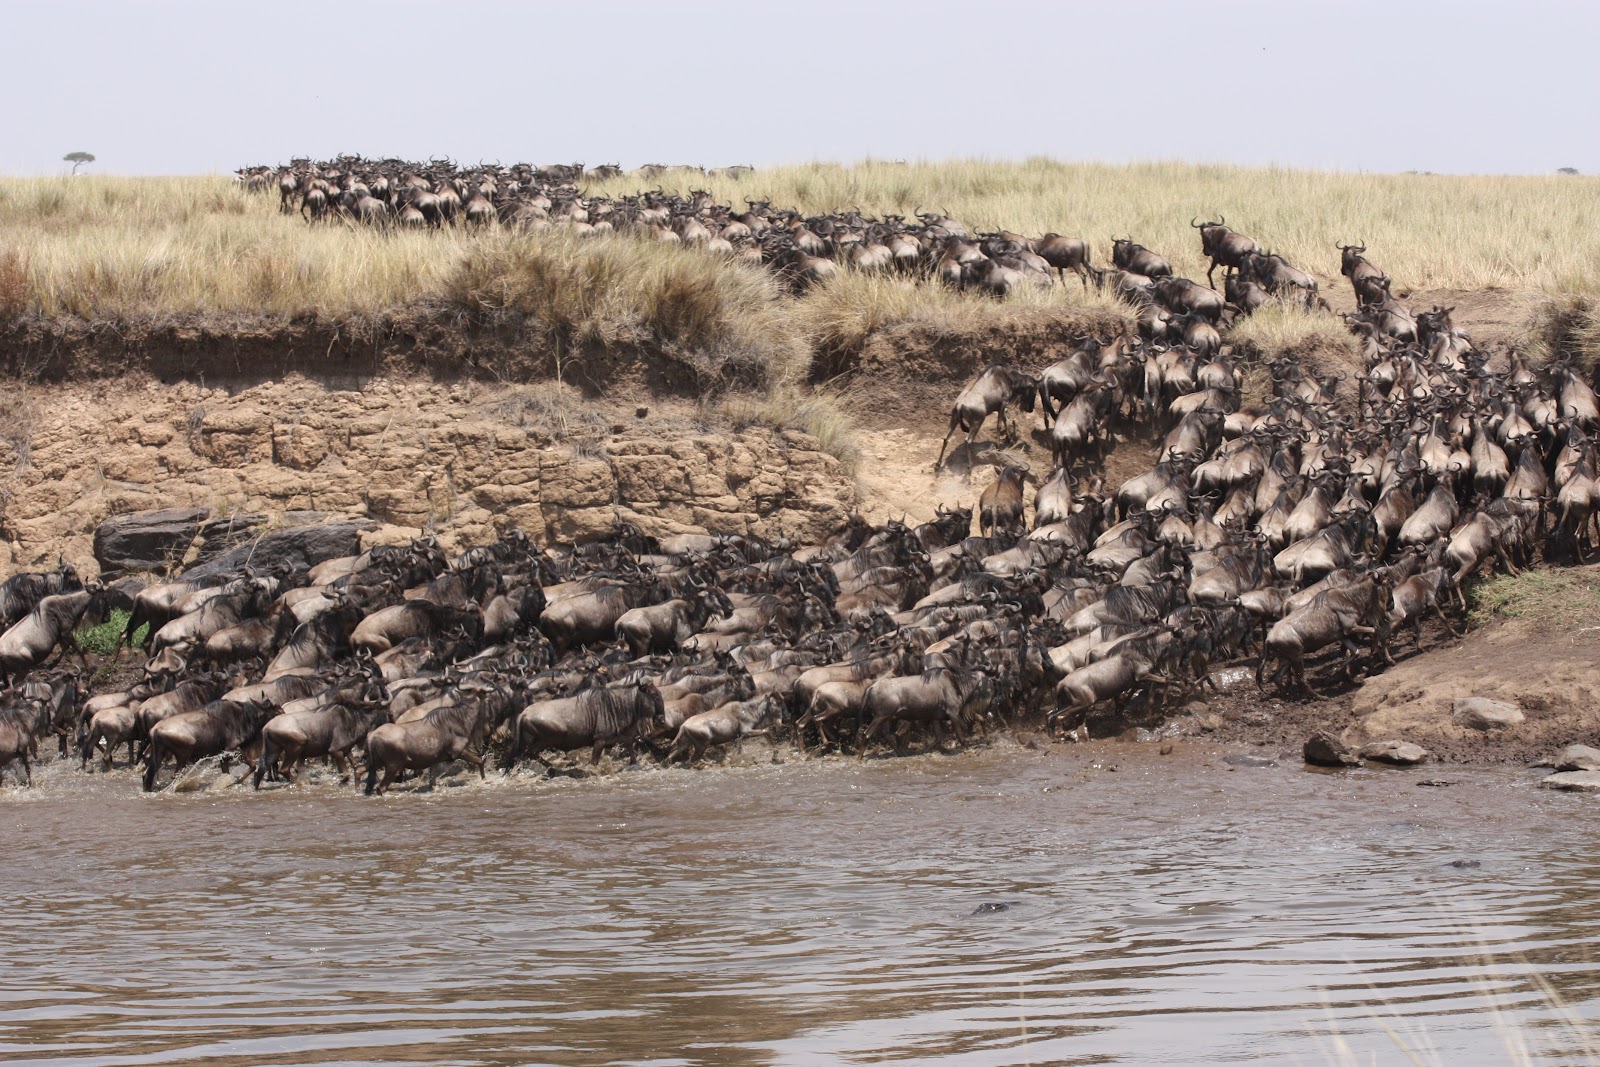 Witness the annual wildebeest migration at the Maasai Mara.